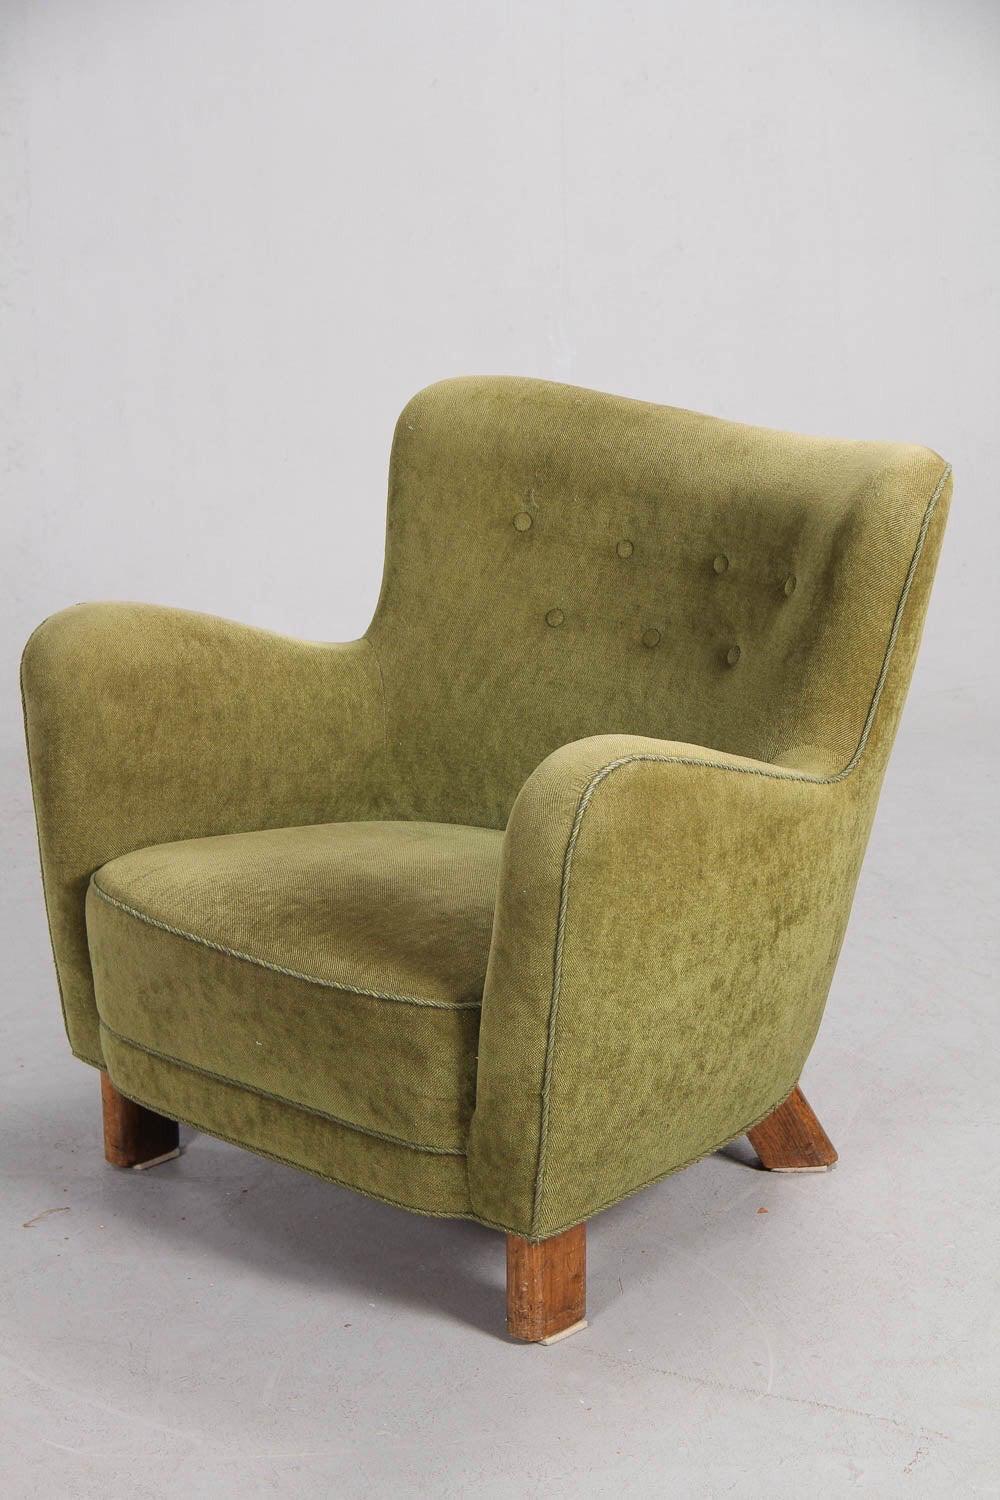 Fritz Hansen easy chair, model 1669, circa 1930s. 

Sculptural chair re-upholstered in beige sheepskin, legs of stained beech. All work carried out as original with filling in organic materials and bottom finish with nails.

The chair will be